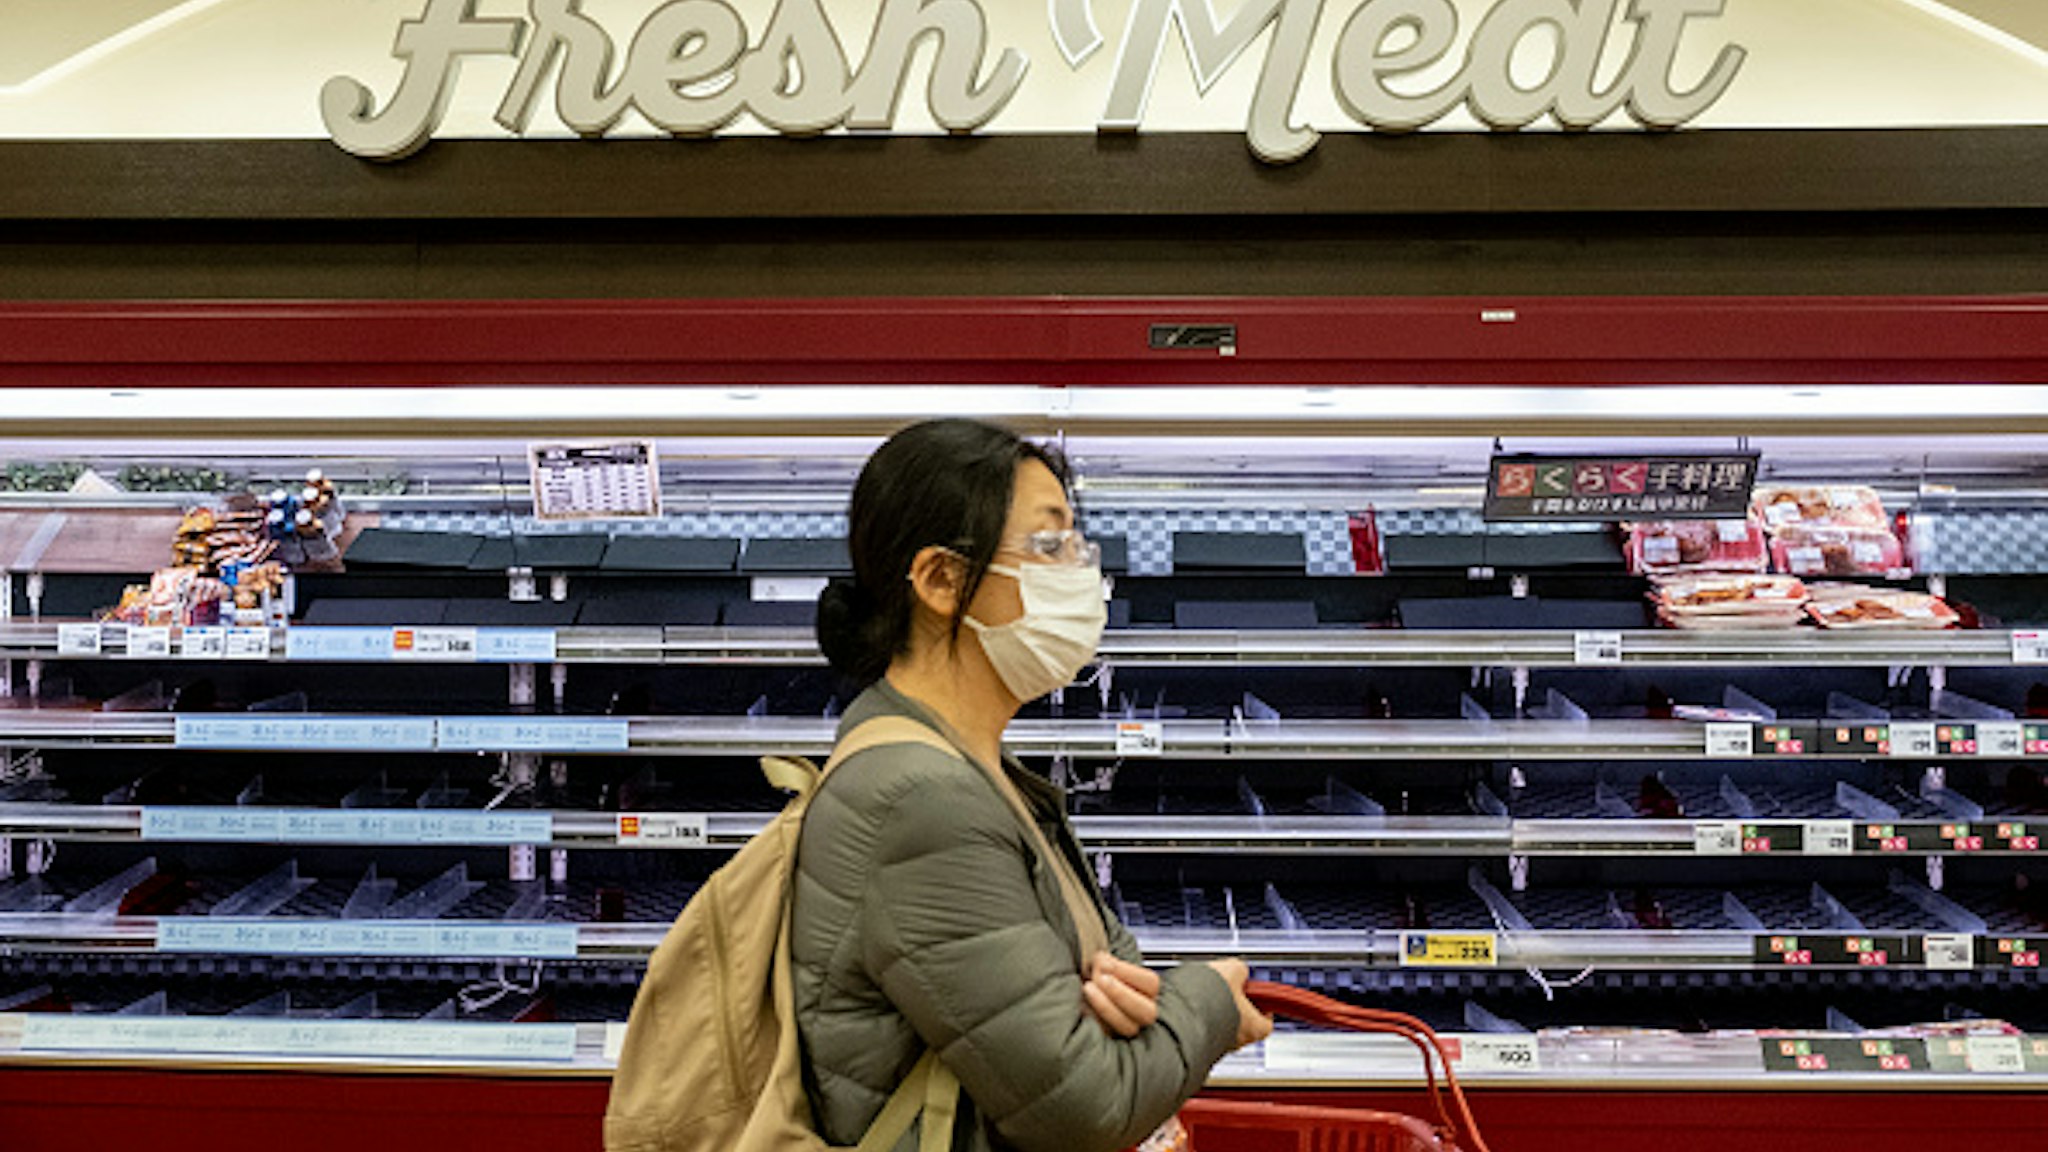 TOKYO, JAPAN - MARCH 27, 2020: A woman wearing a face mask as a precaution against the spread of Coronavirus seen shopping after the Tokyo Local Government have asked citizen to stay home and do not go out unless necessary this coming weekend. Concerns are growing about the increasing cases of Coronavirus (COVID-19) in Japan. Many countries have closed borders to Japan and the growing pandemic has caught public attention on the true number of coronavirus cases in Japan that could be much higher.